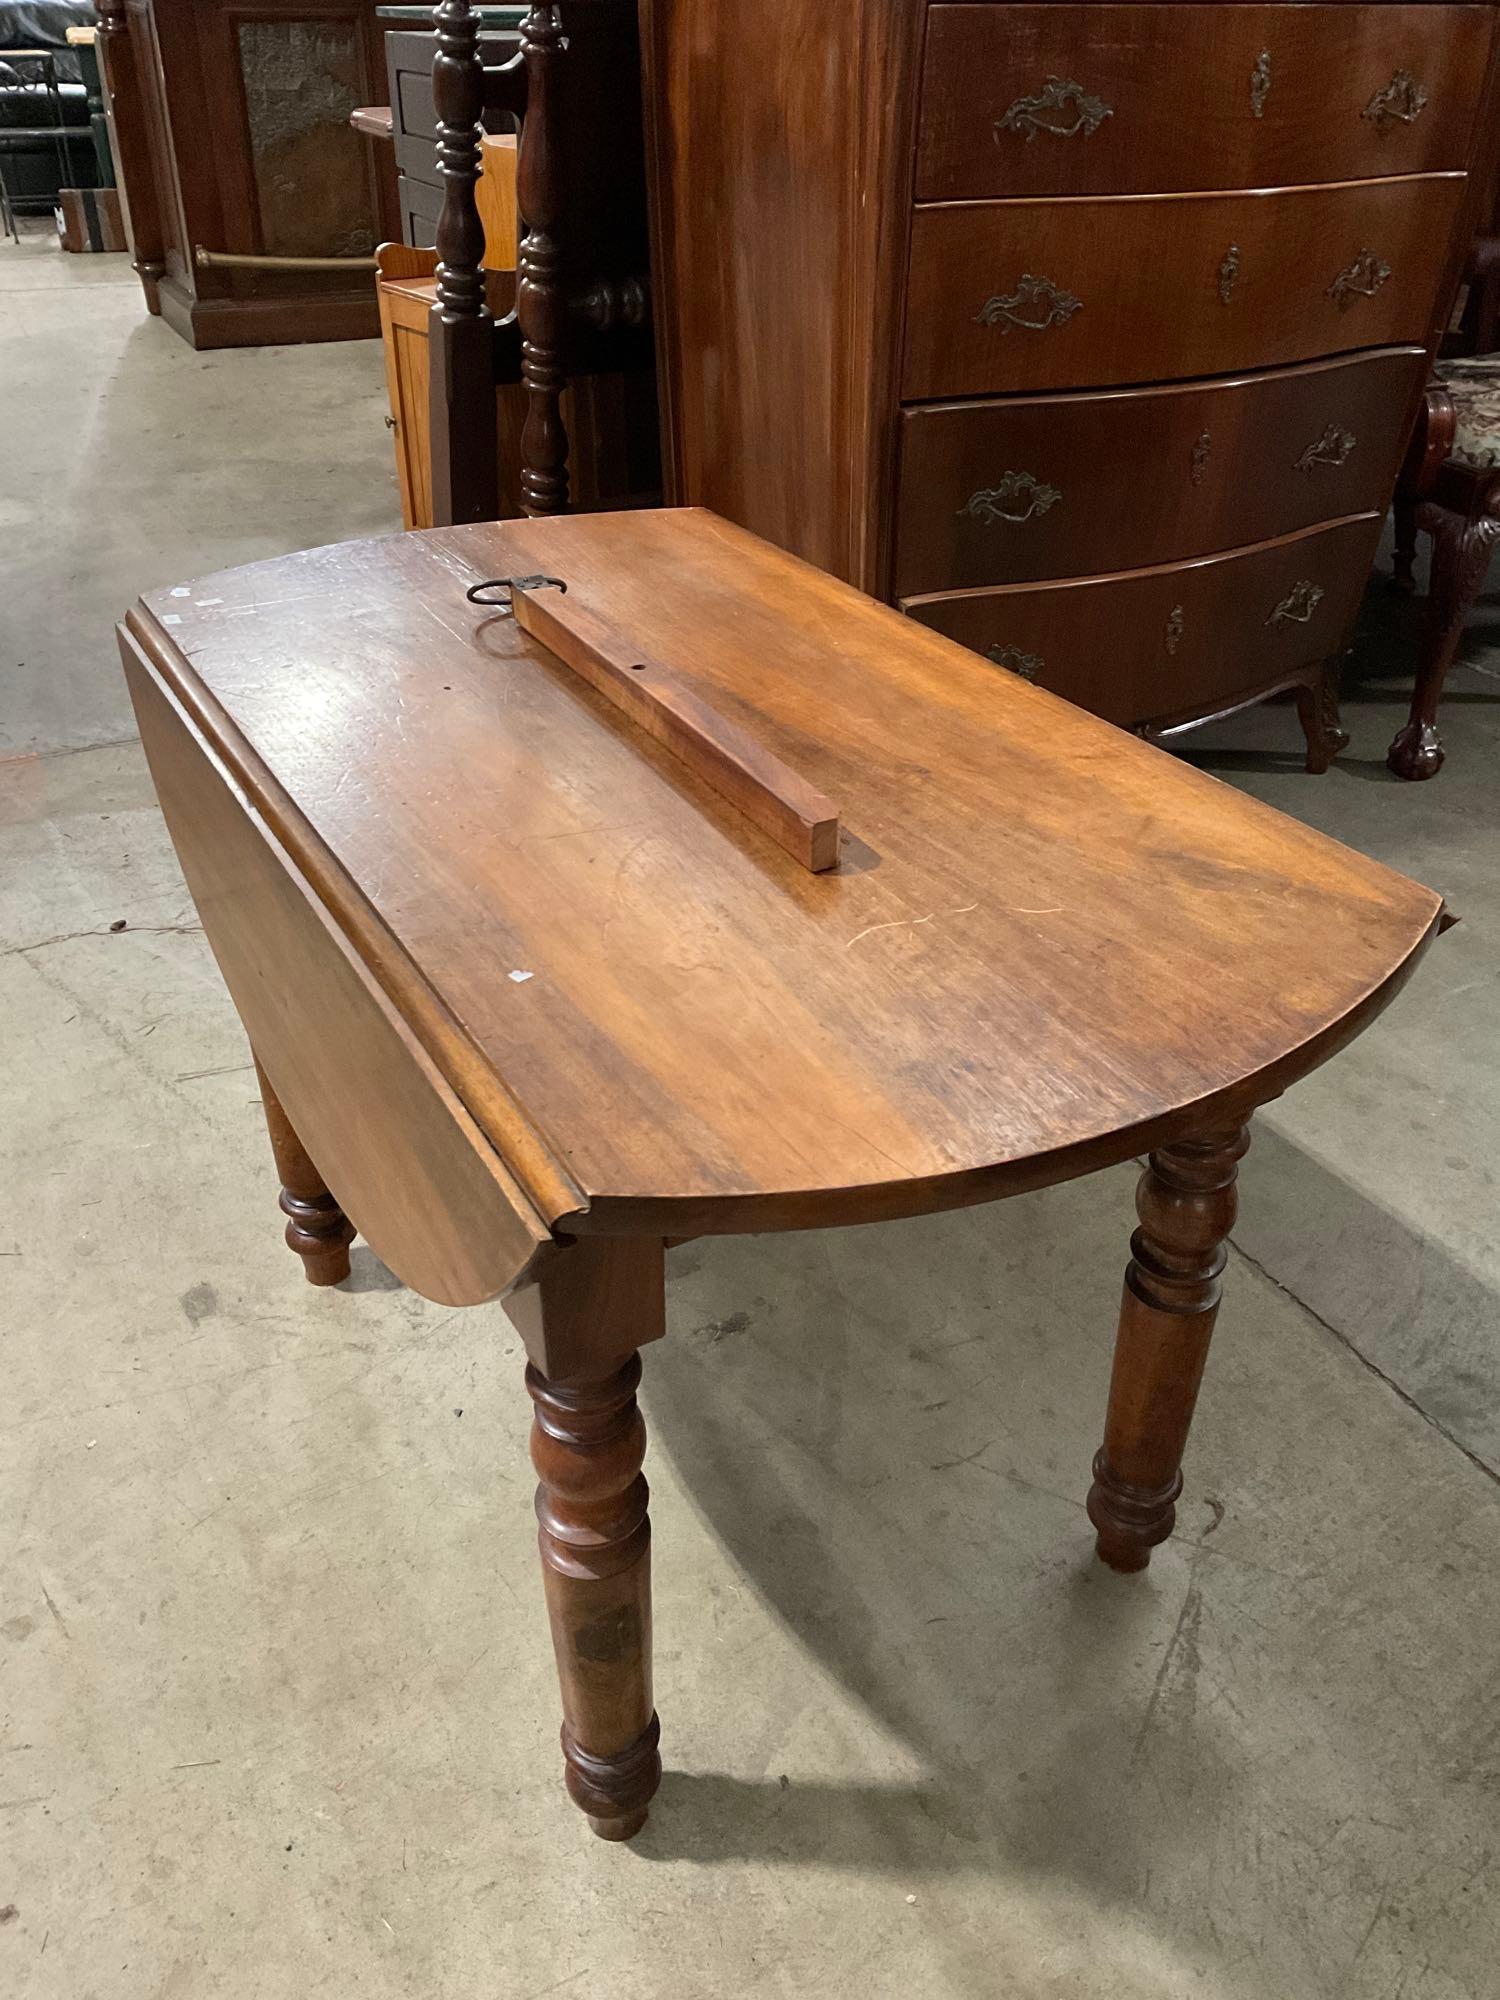 Vintage Round Wooden Drop Leaf Table w/ Spindle Legs. See pics,